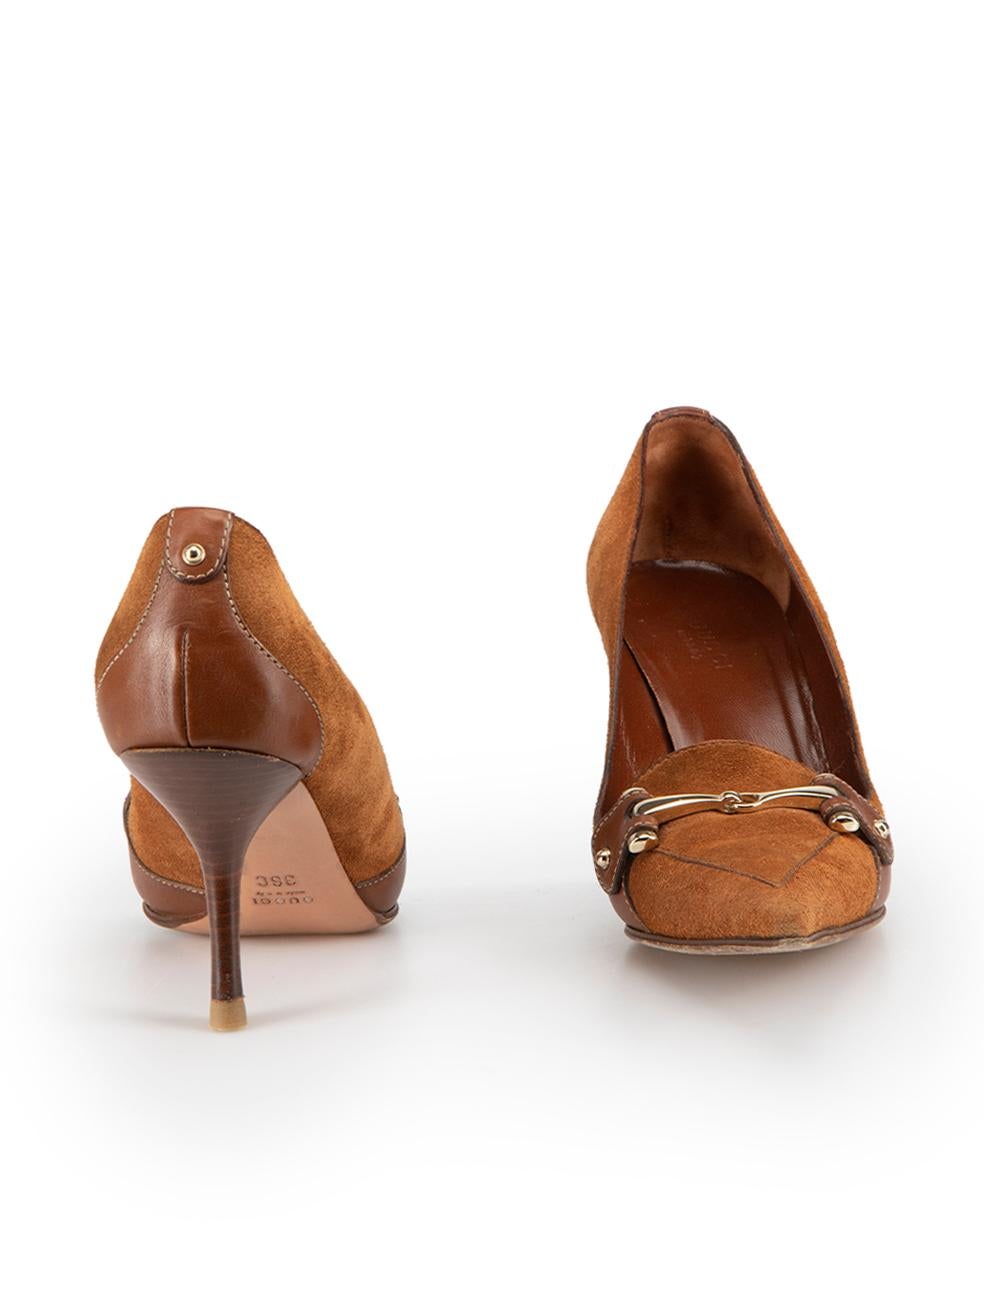 Gucci Brown Suede Horsebit Accent Pumps Size IT 36 In Good Condition For Sale In London, GB